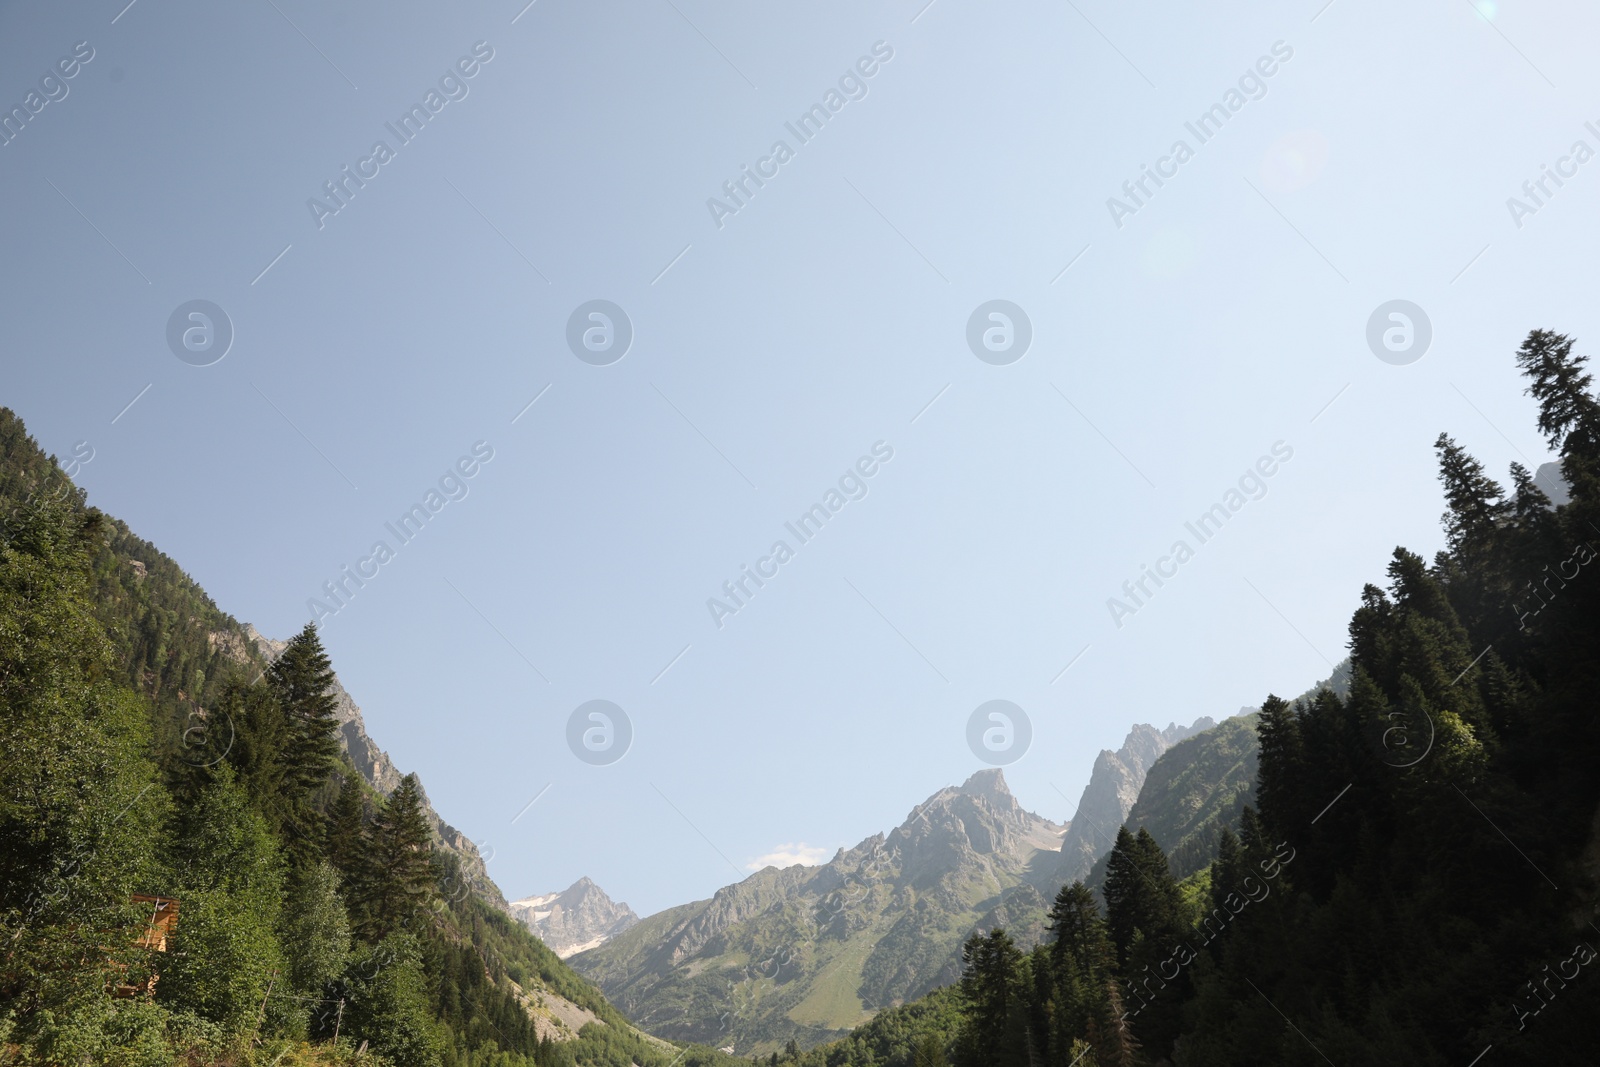 Photo of Picturesque view of trees and mountains under light blue sky outdoors, space for text